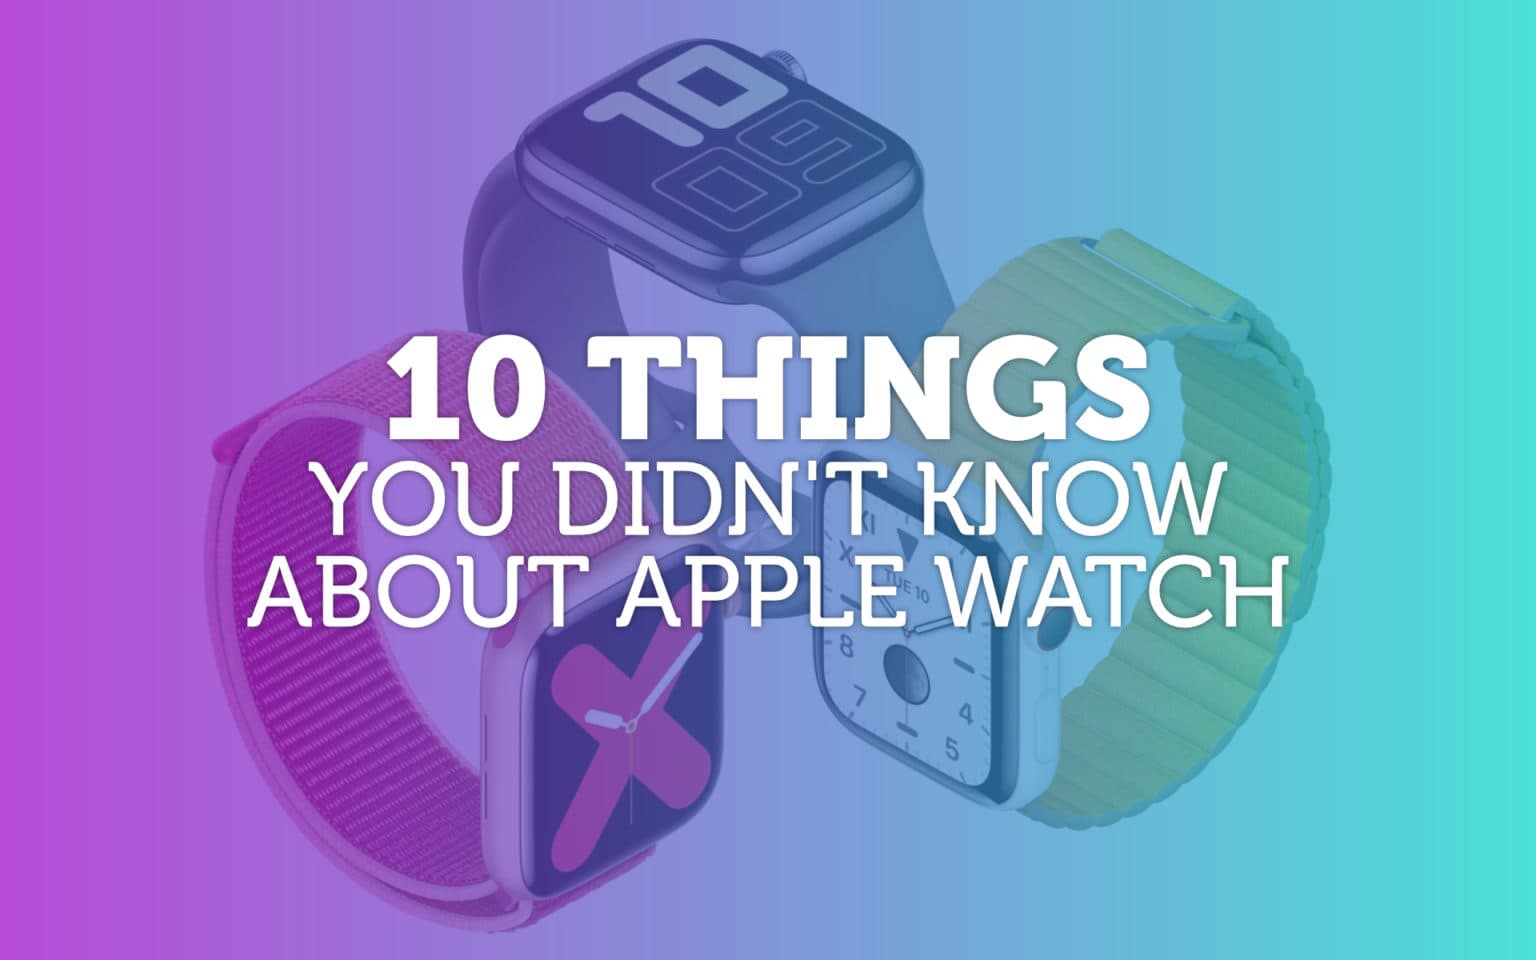 Apple Watch trivia: You can't make this stuff up.